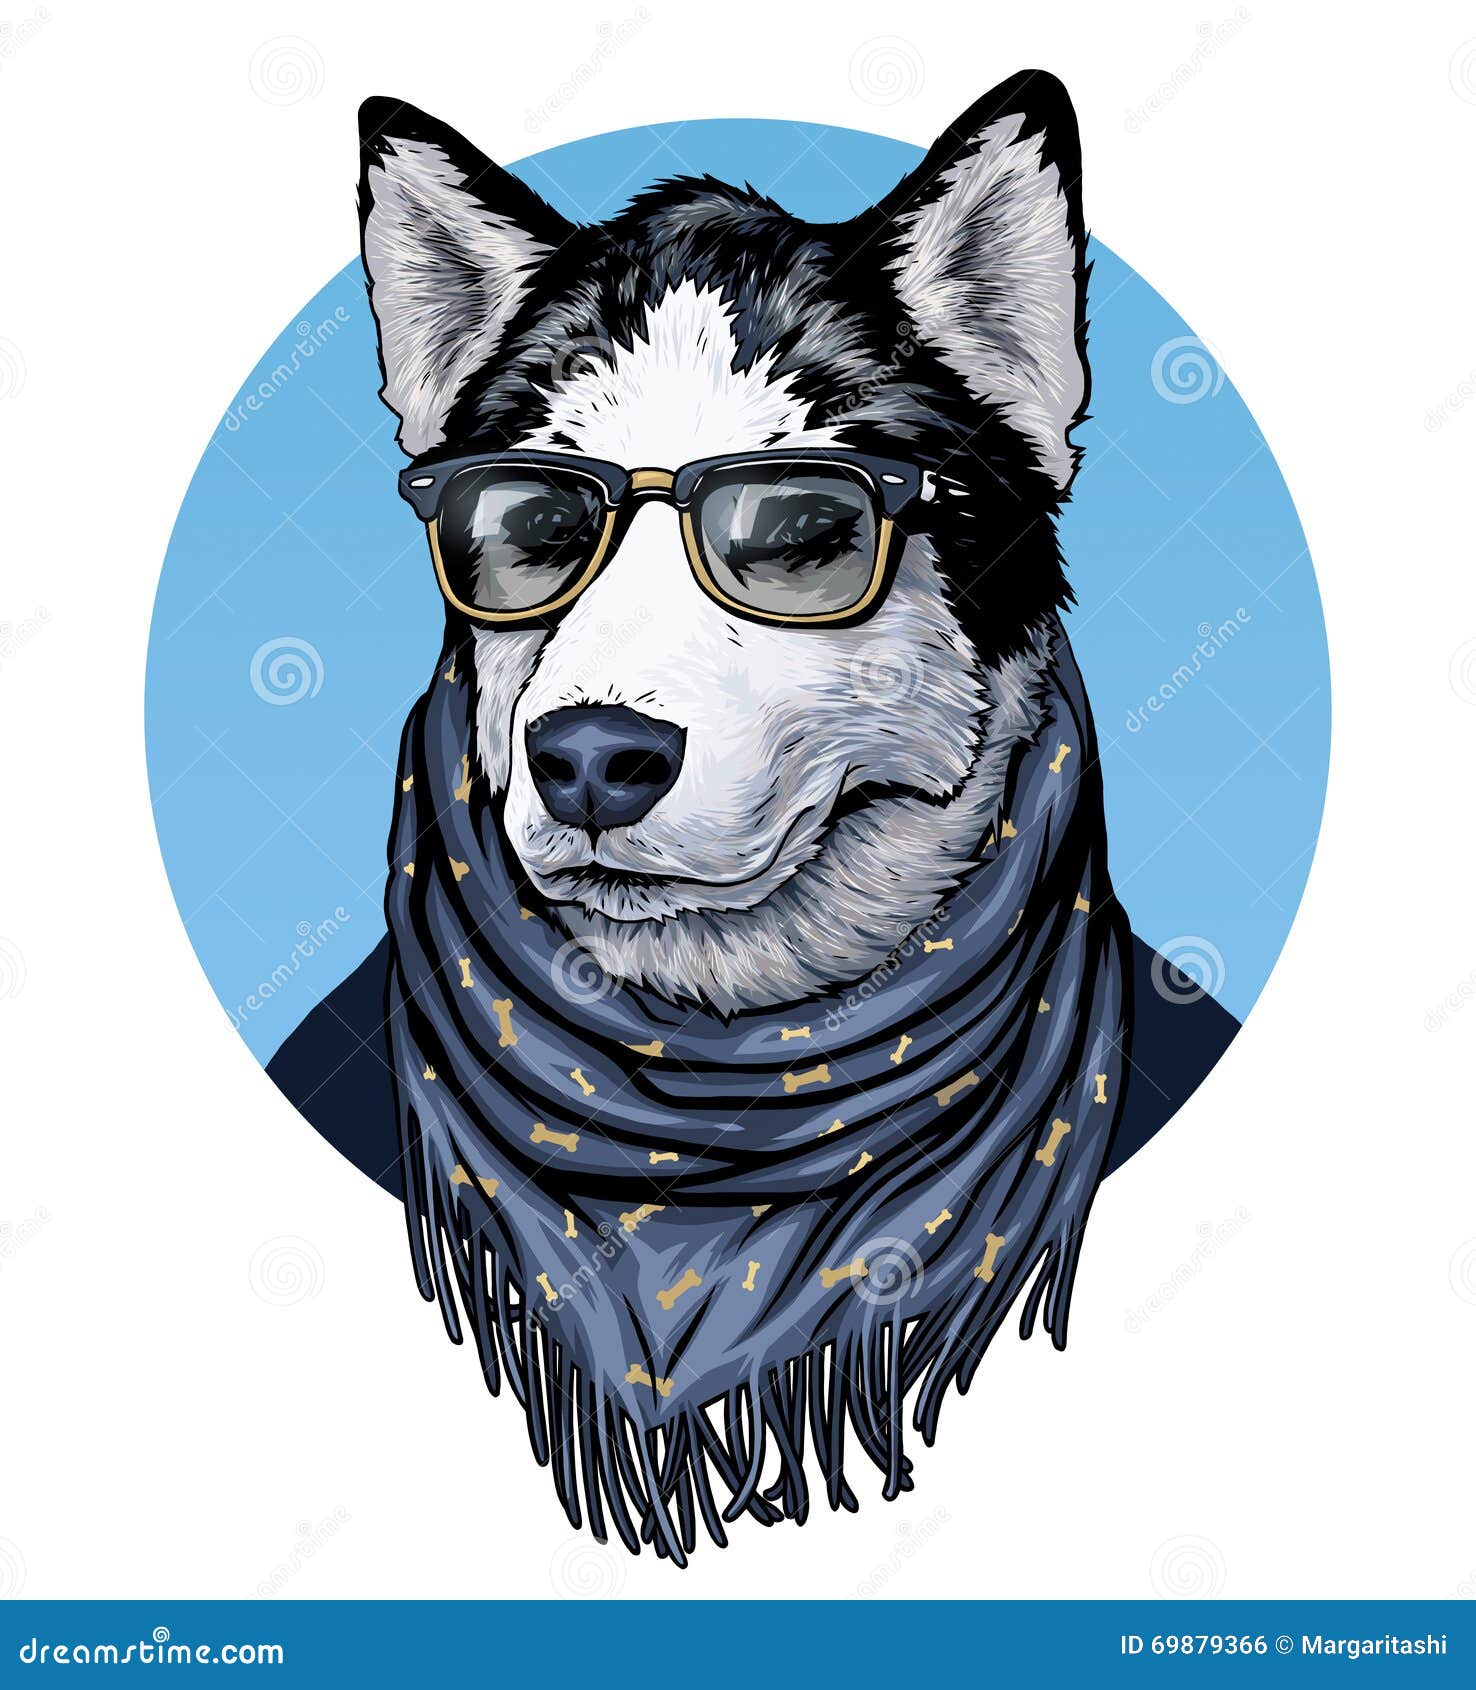 husky. dog wearing spectacles and scarf. ÃÂ¡olor graphic 